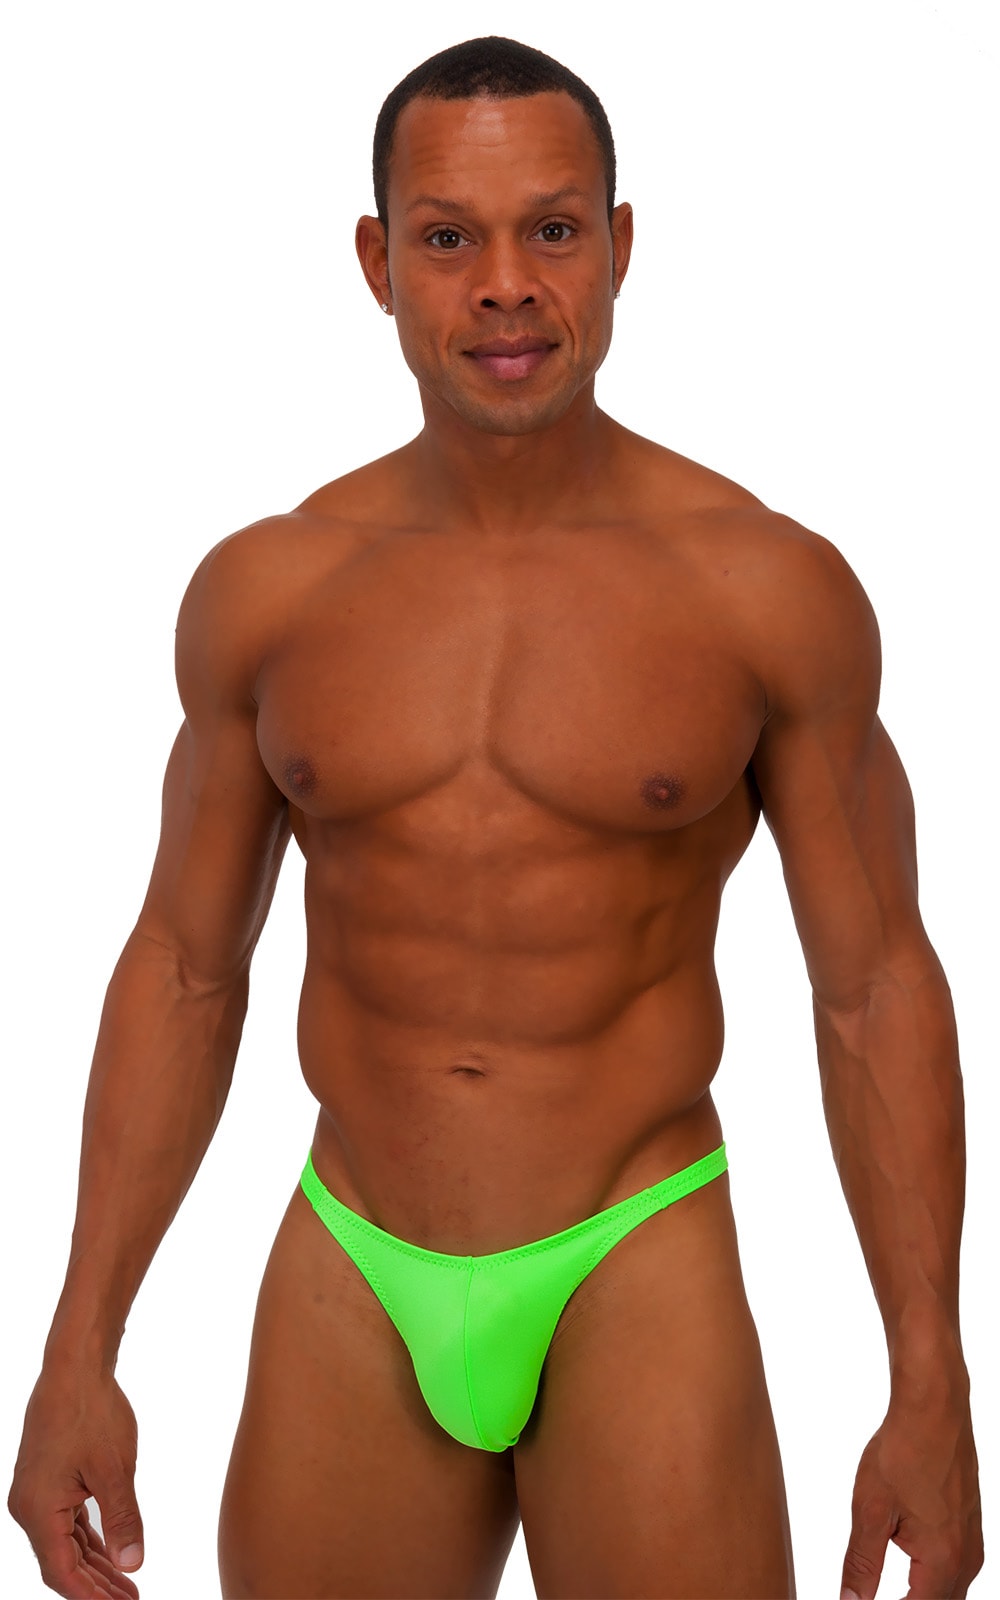 Posing Suit - Competition Bikini Cut in Neon Lime, Front View